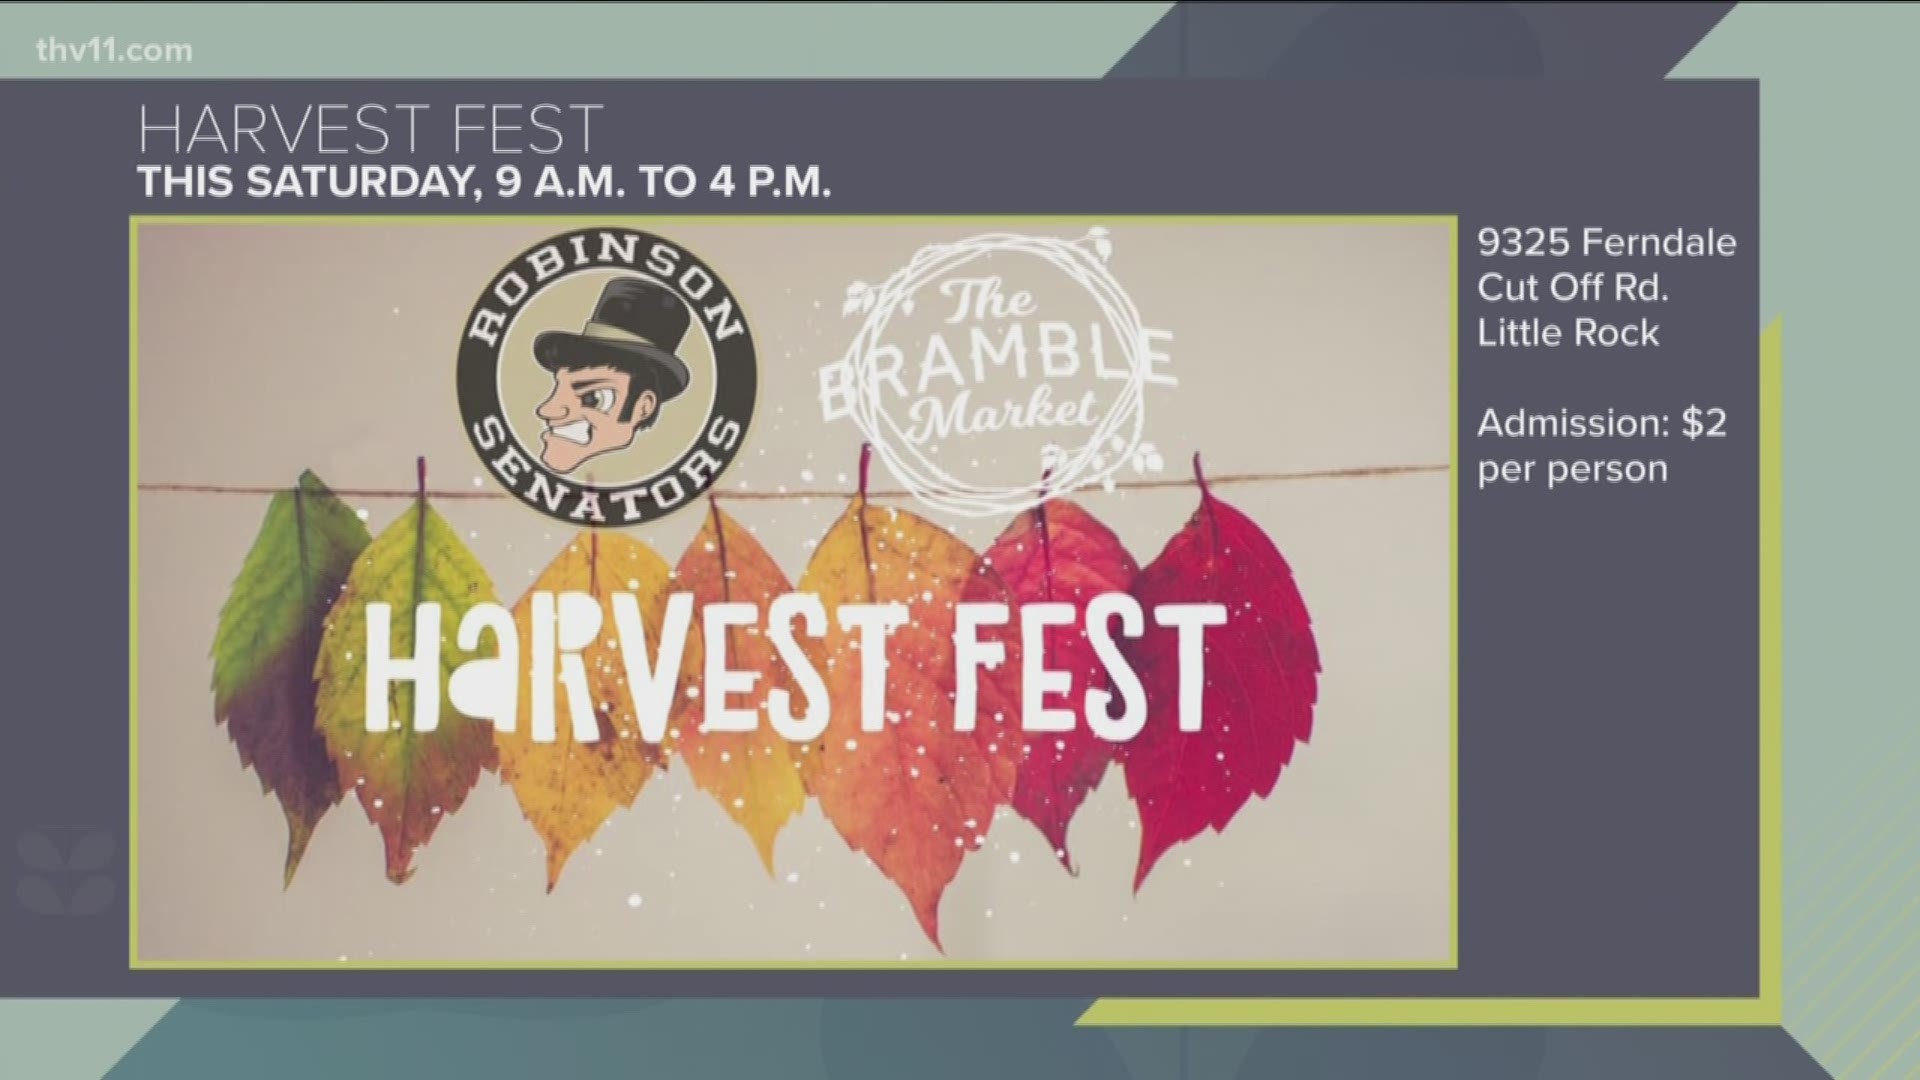 Nothing says fall like a pumpkin patch, hayrides, food trucks, and our friends at The Bramble Market in Ferndale.